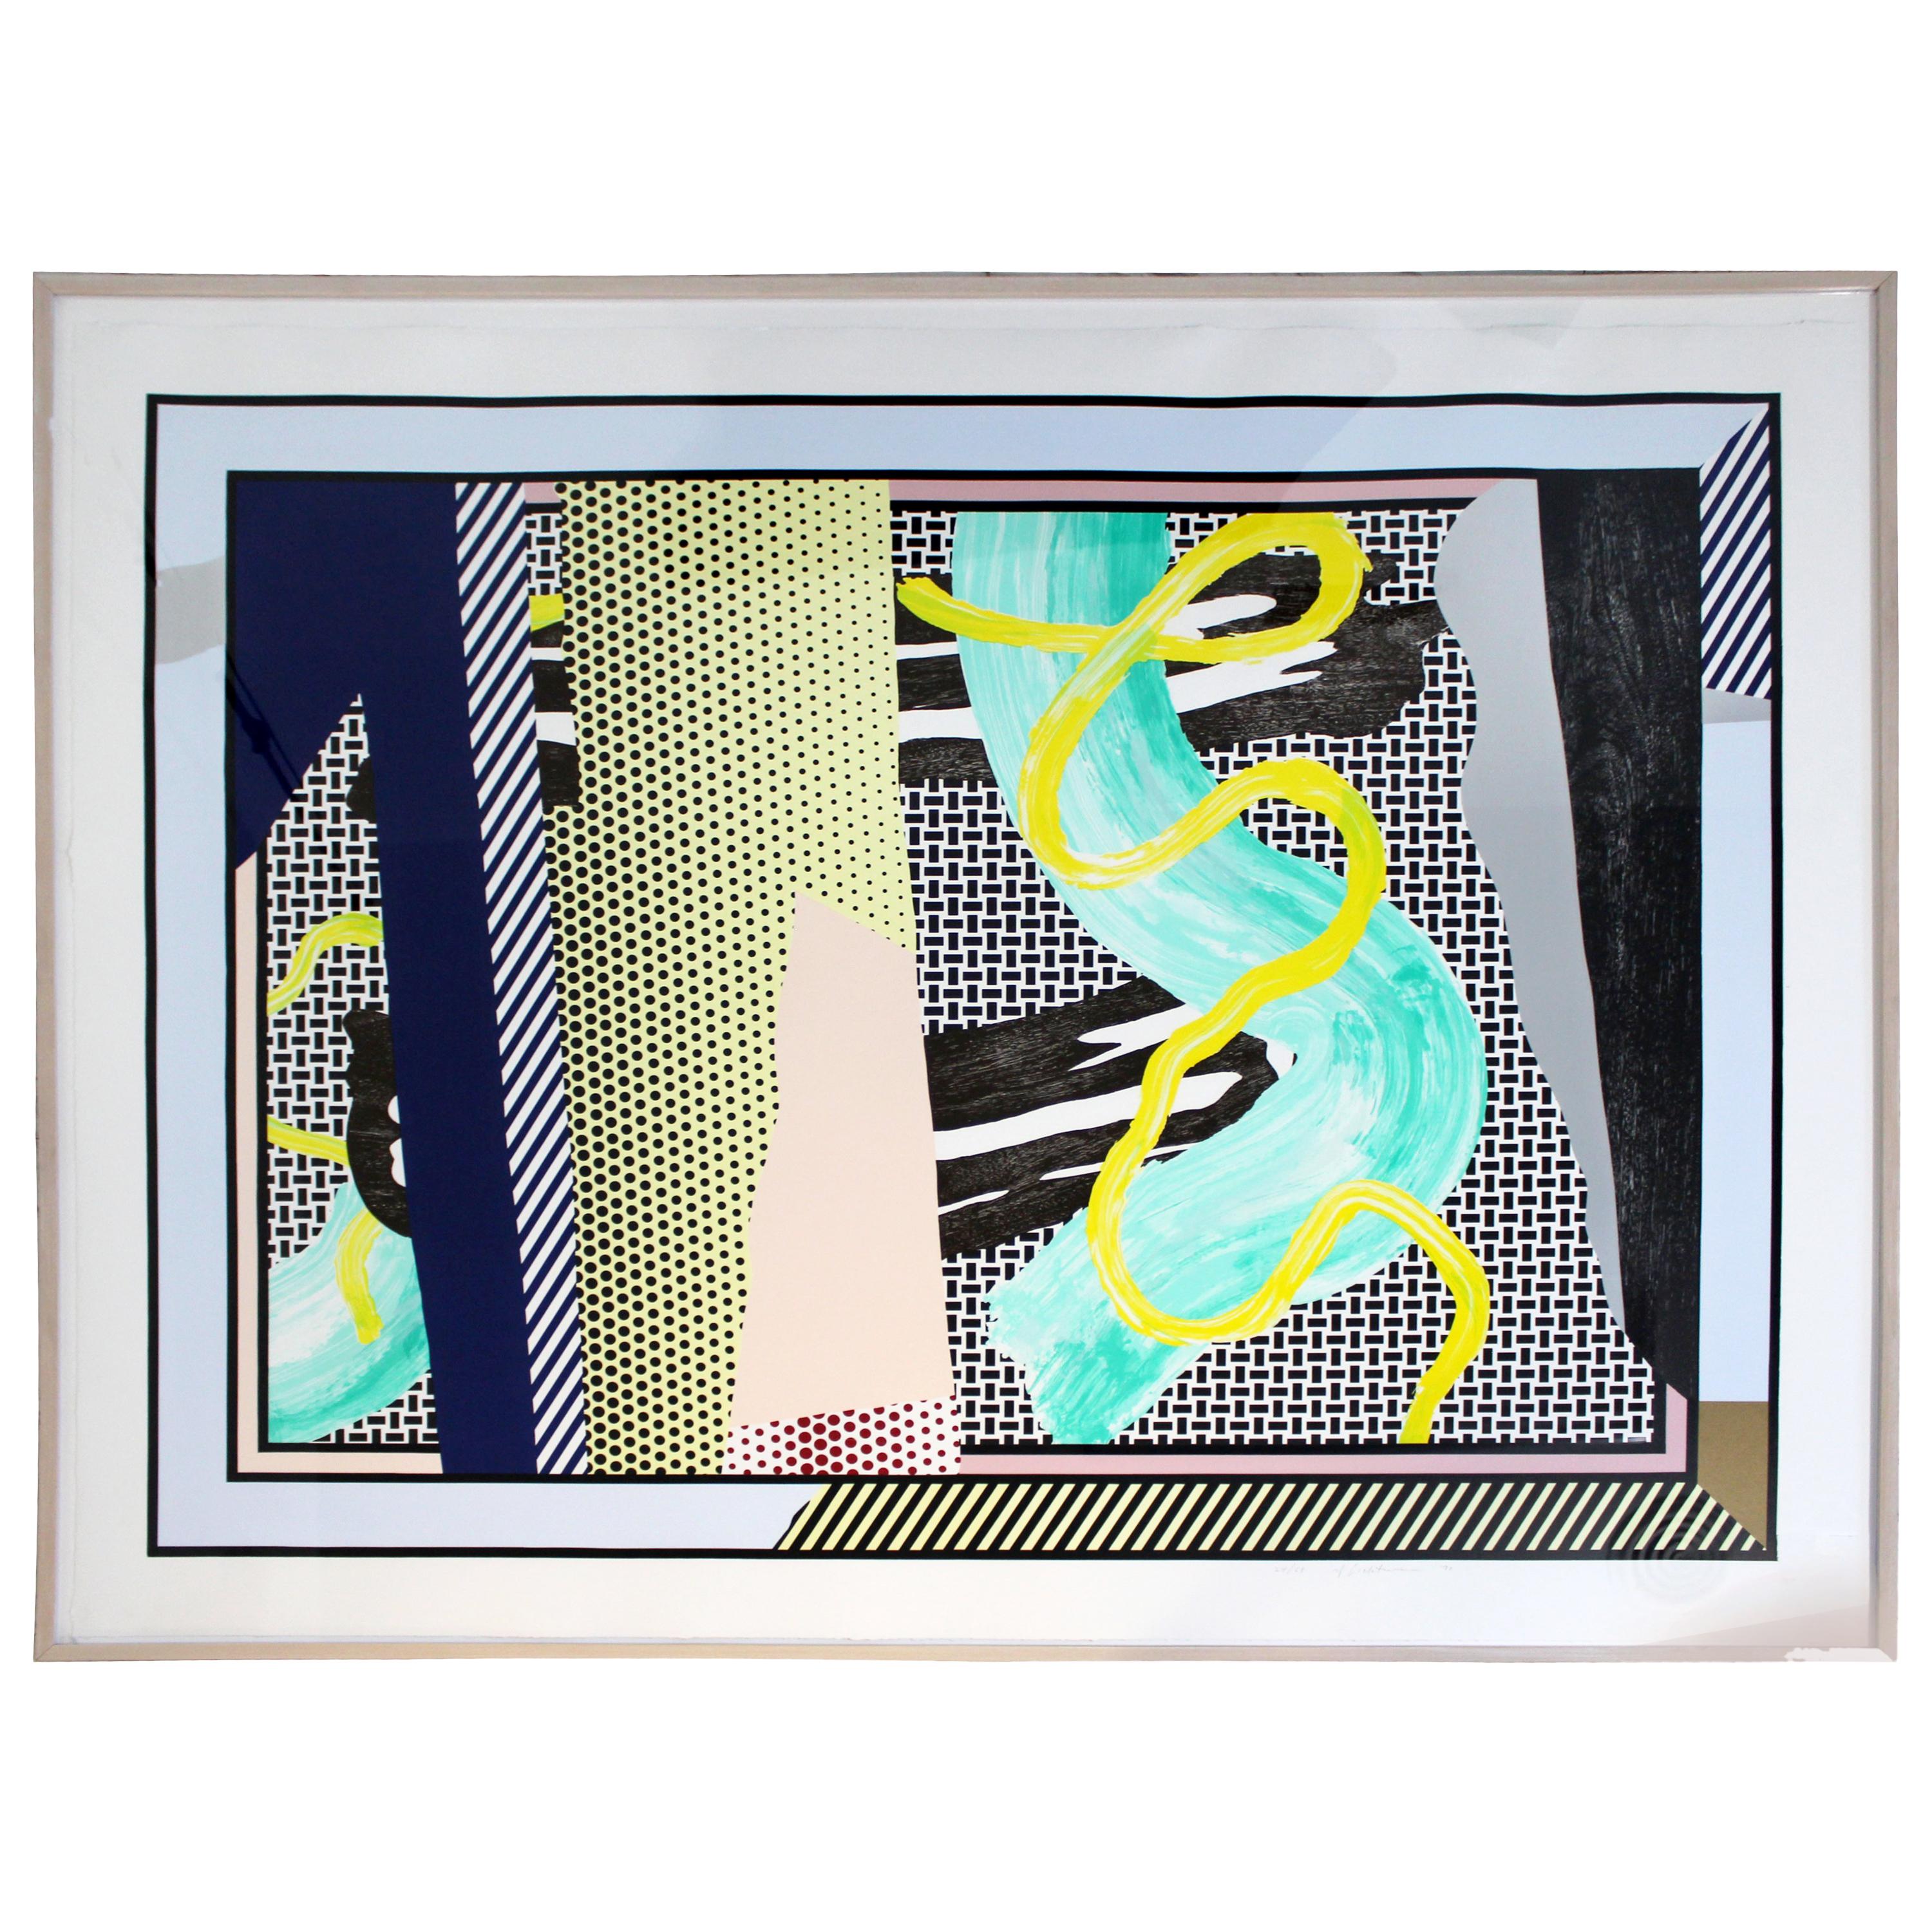 Contemporary Modern Large Framed Colored Serigraph Signed Roy Lichtenstein, 1990